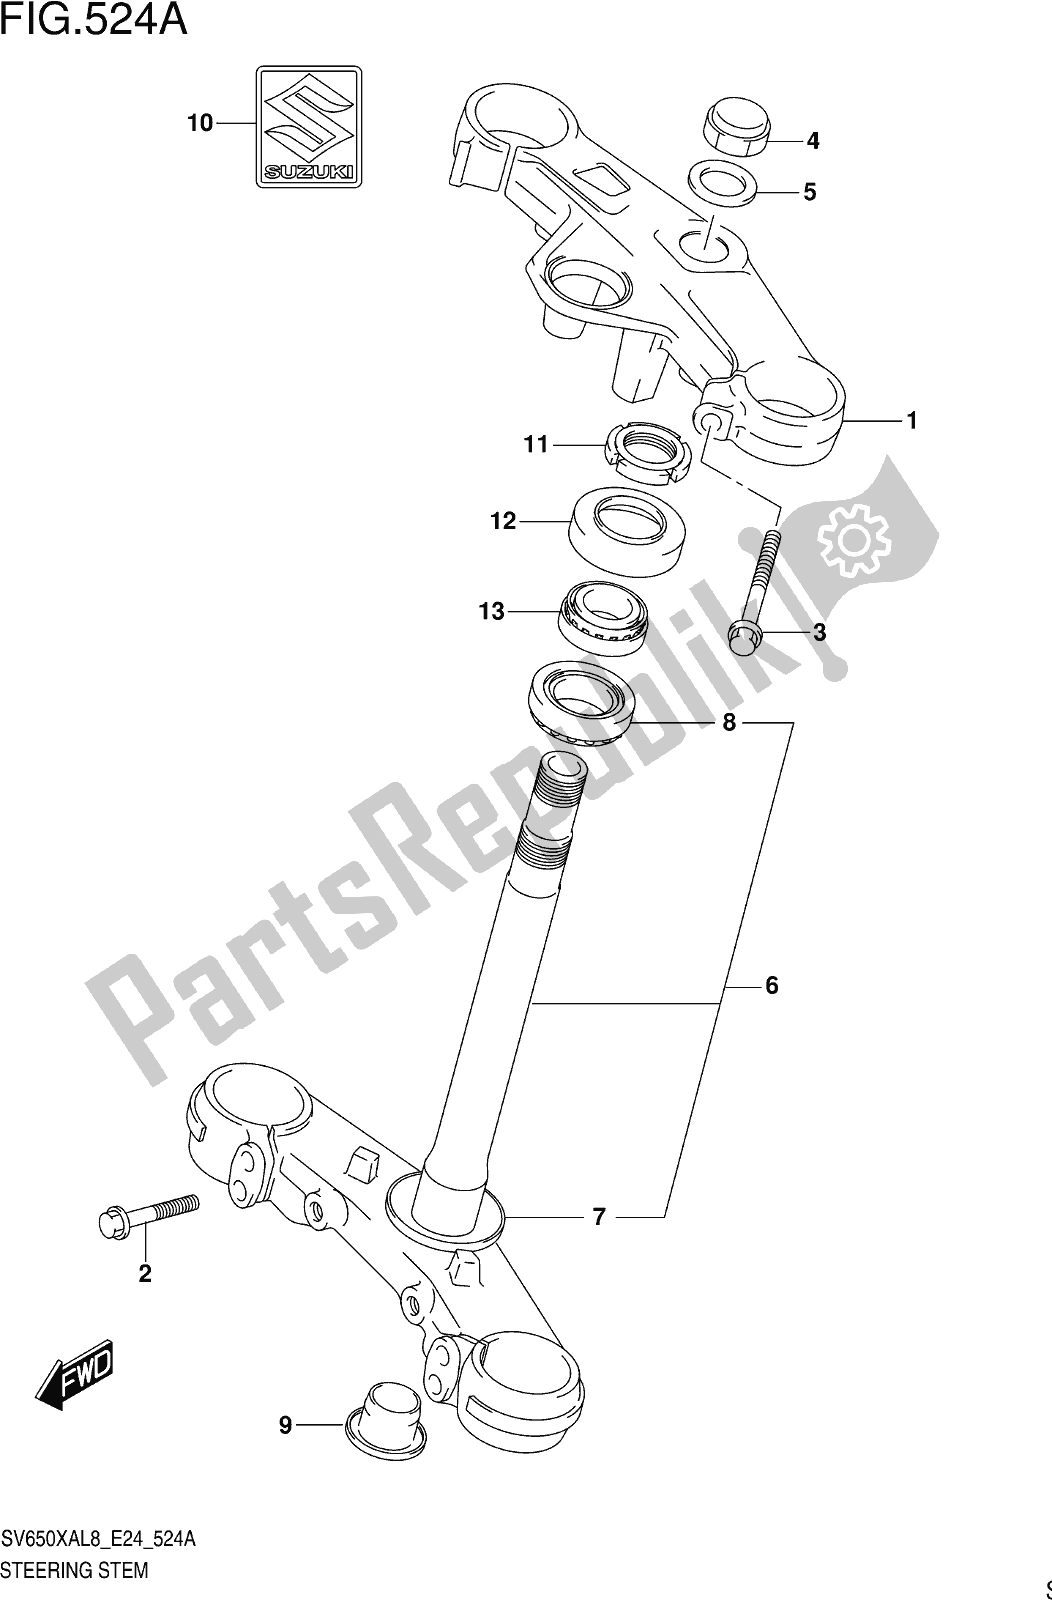 All parts for the Fig. 524a Steering Stem of the Suzuki SV 650 XAU 2018